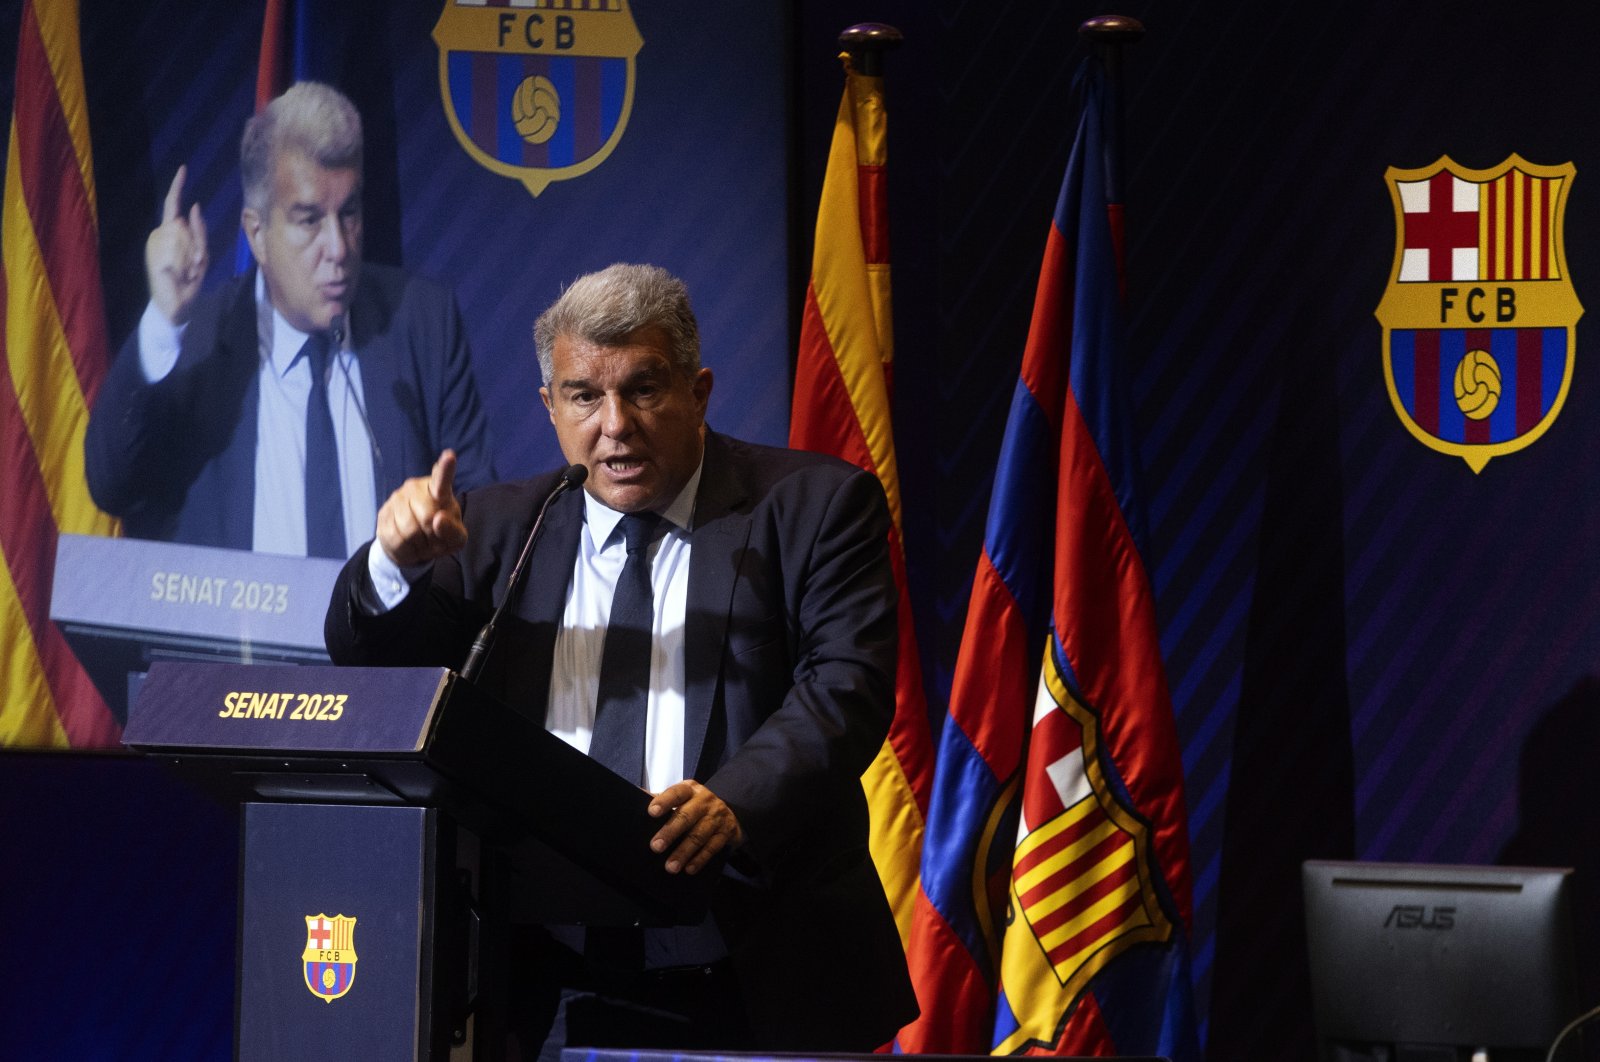 President of FC Barcelona Joan Laporta delivers a speech during the regular meeting of the Catalan entity&#039;s Senate, in which he assured that this summer they will reinforce the team to "aspire to everything" next season, Barcelona, Spain, June 14, 2023. (EPA Photo)